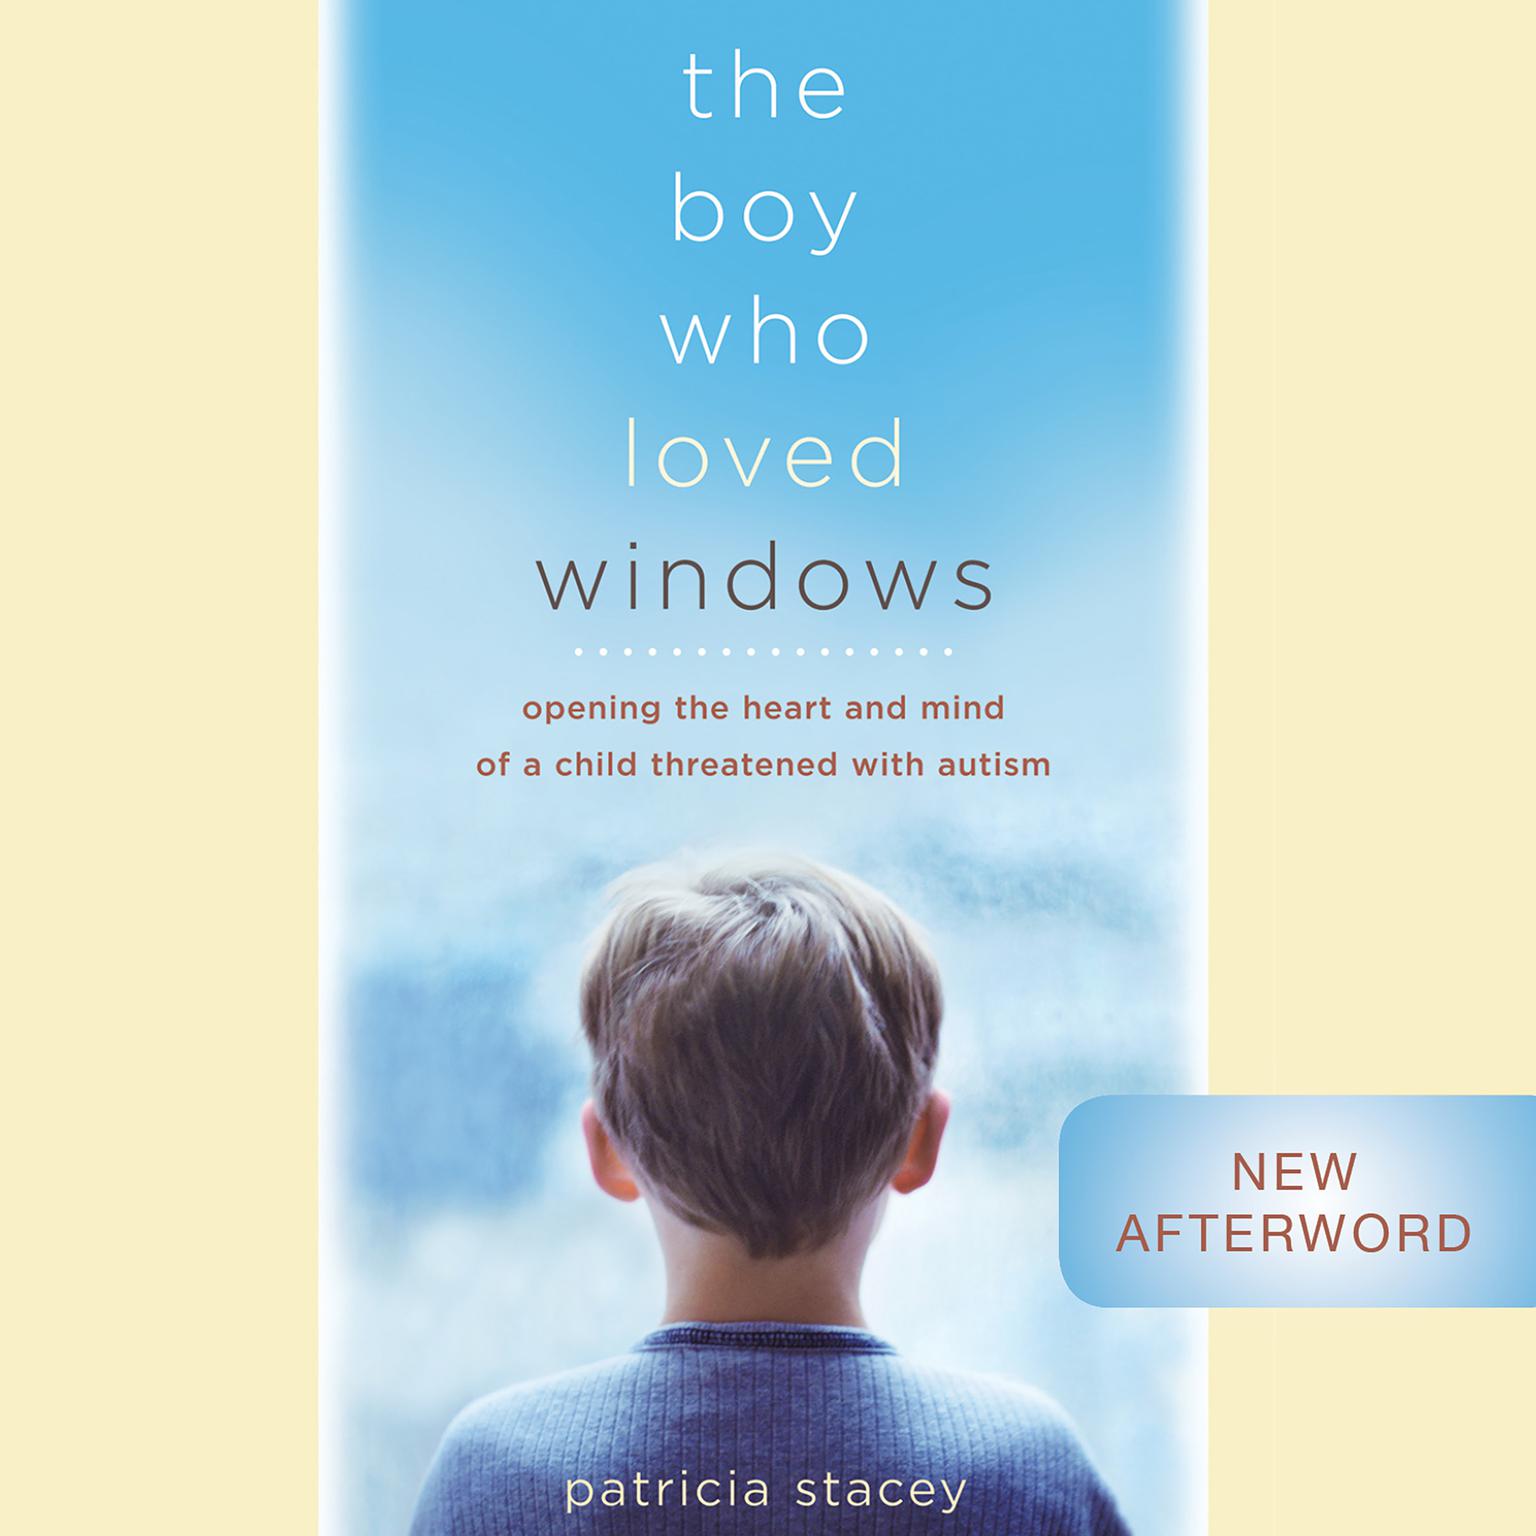 The Boy Who Loved Windows: Opening The Heart And Mind Of A Child Threatened With Autism Audiobook, by Patricia Stacey